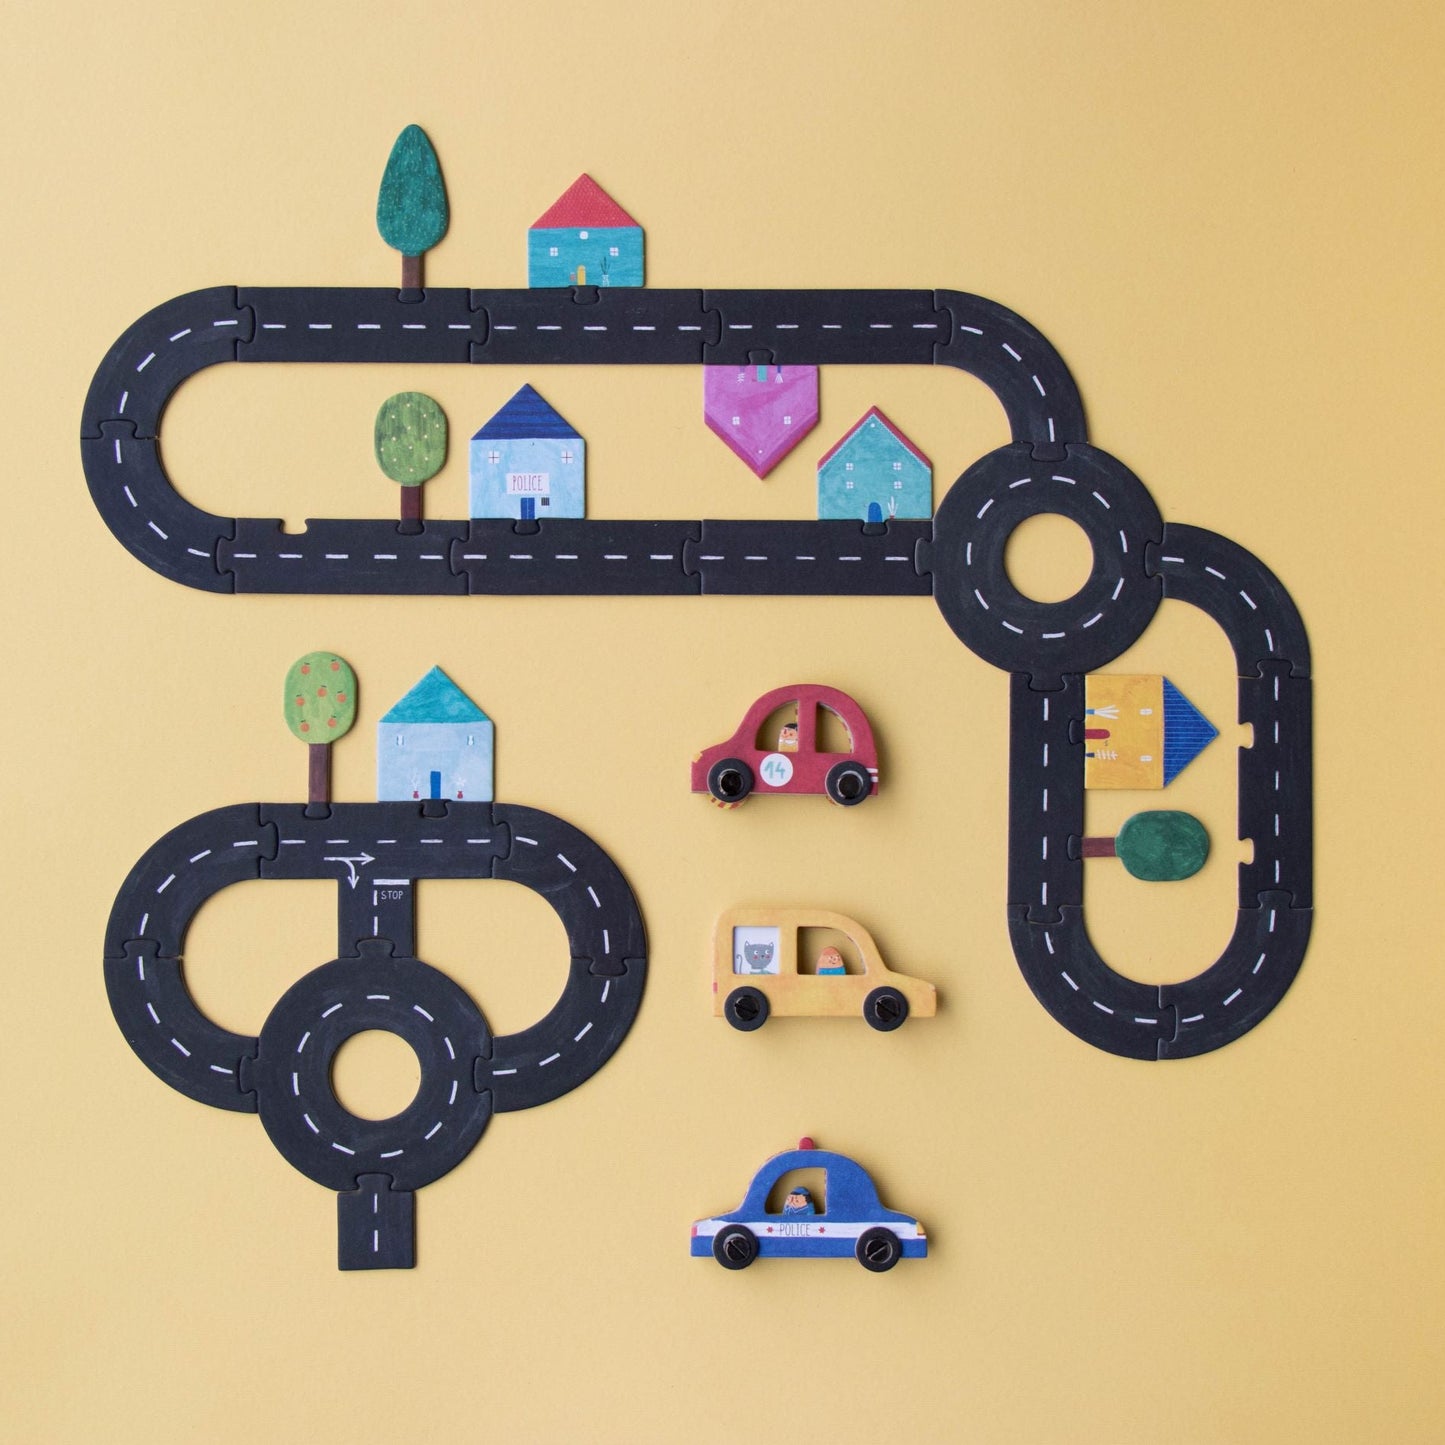 Londji Roads: construction and design game